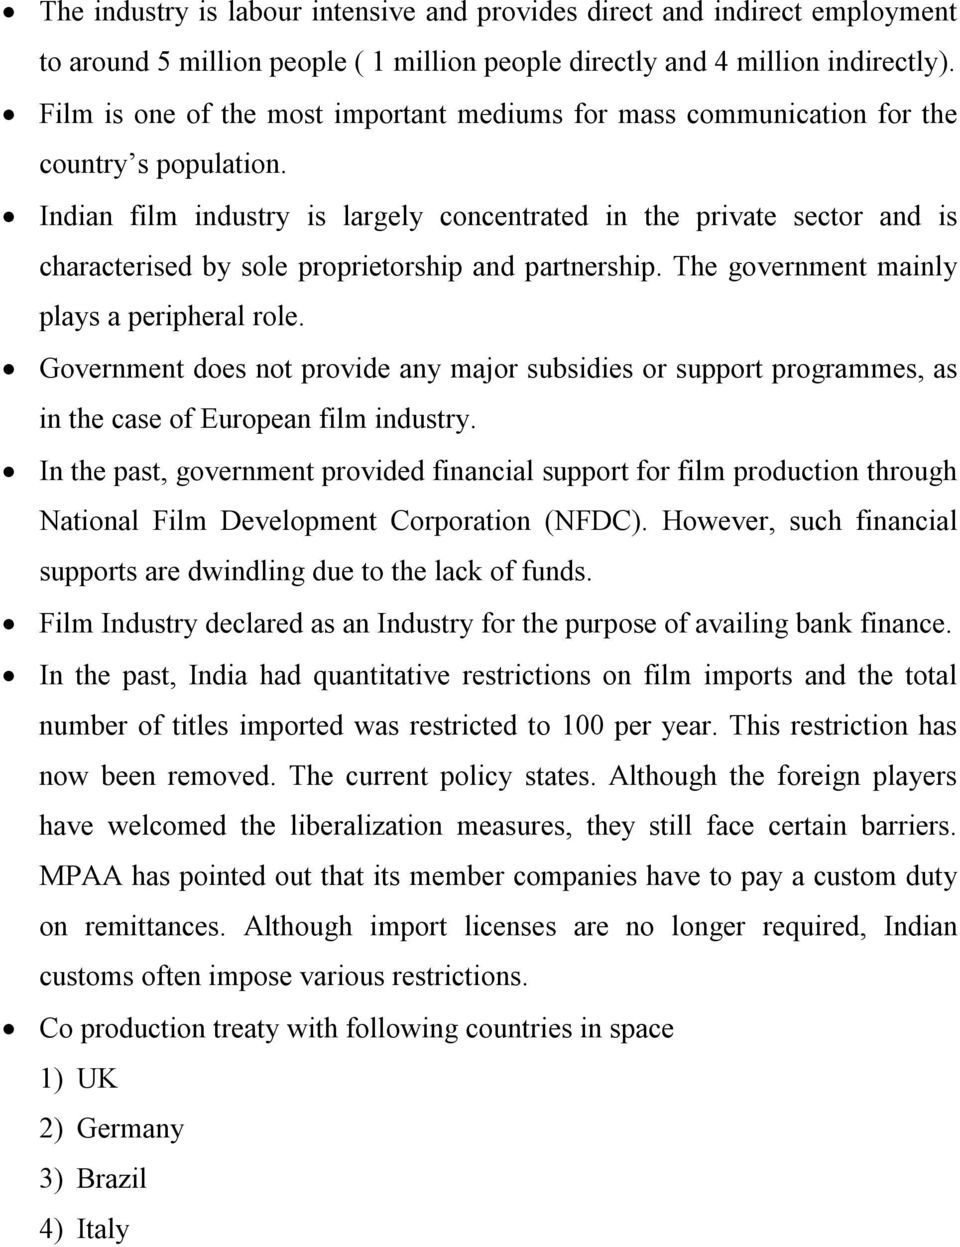 Indian film industry is largely concentrated in the private sector and is characterised by sole proprietorship and partnership. The government mainly plays a peripheral role.